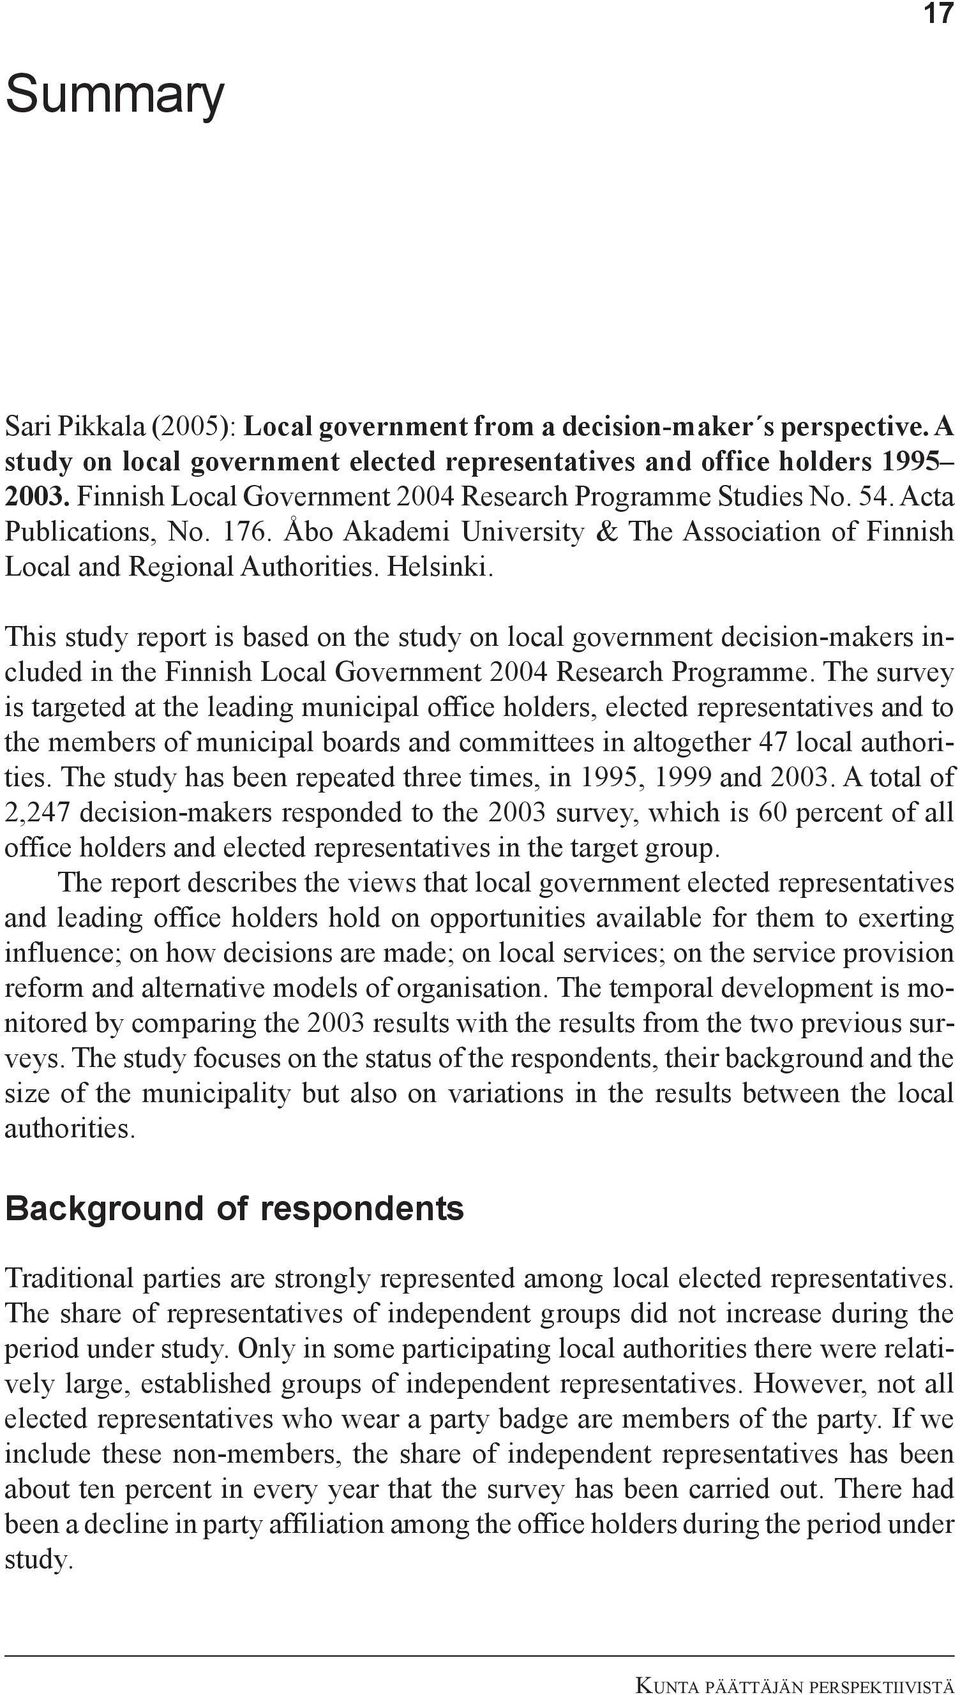 This study report is based on the study on local government decision-makers included in the Finnish Local Government 2004 Research Programme.